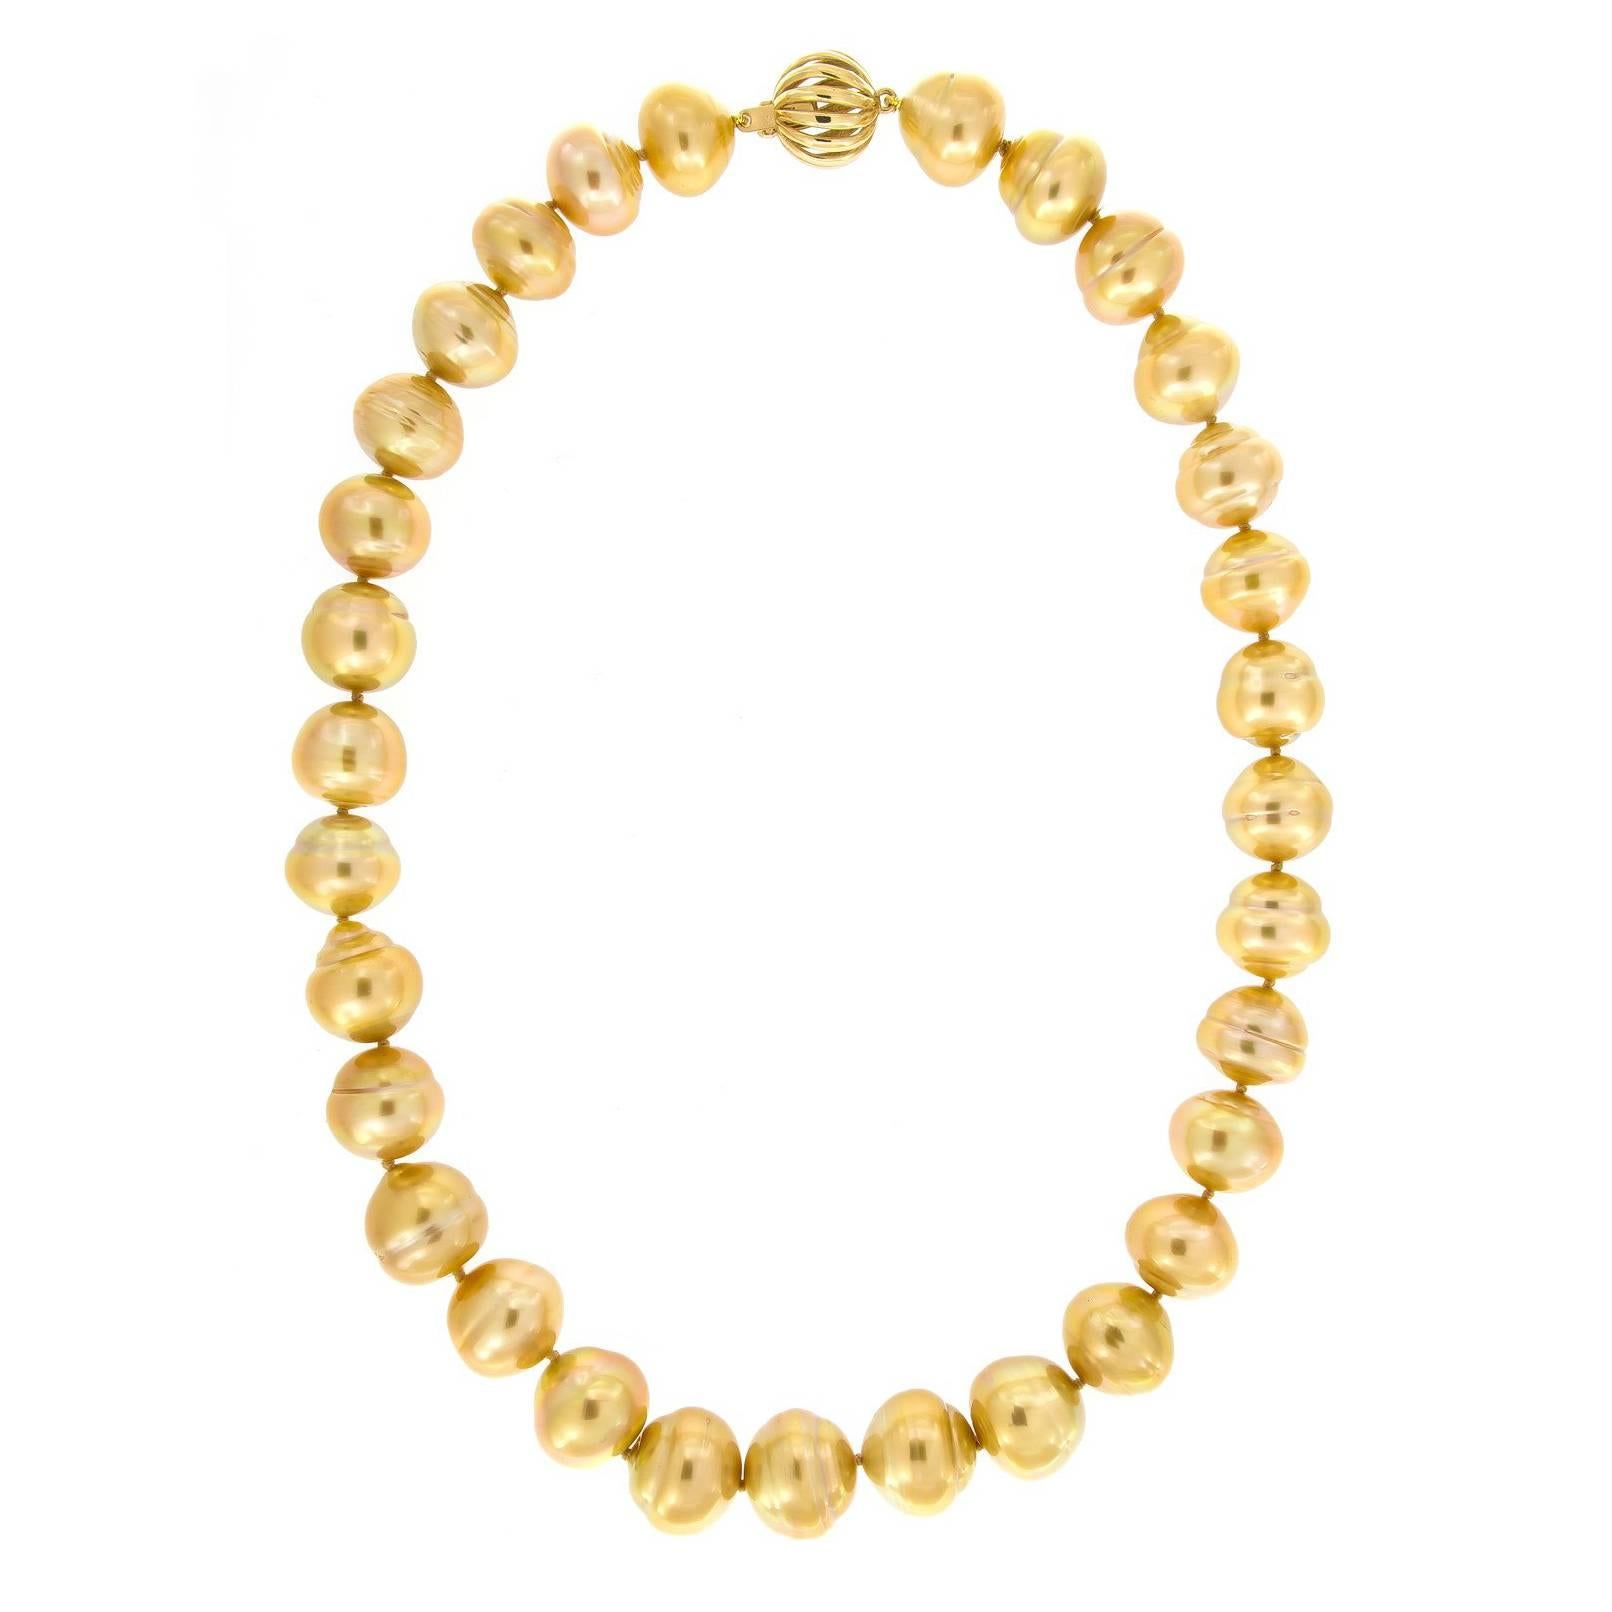 Golden South Sea Pearl and Gold Necklace